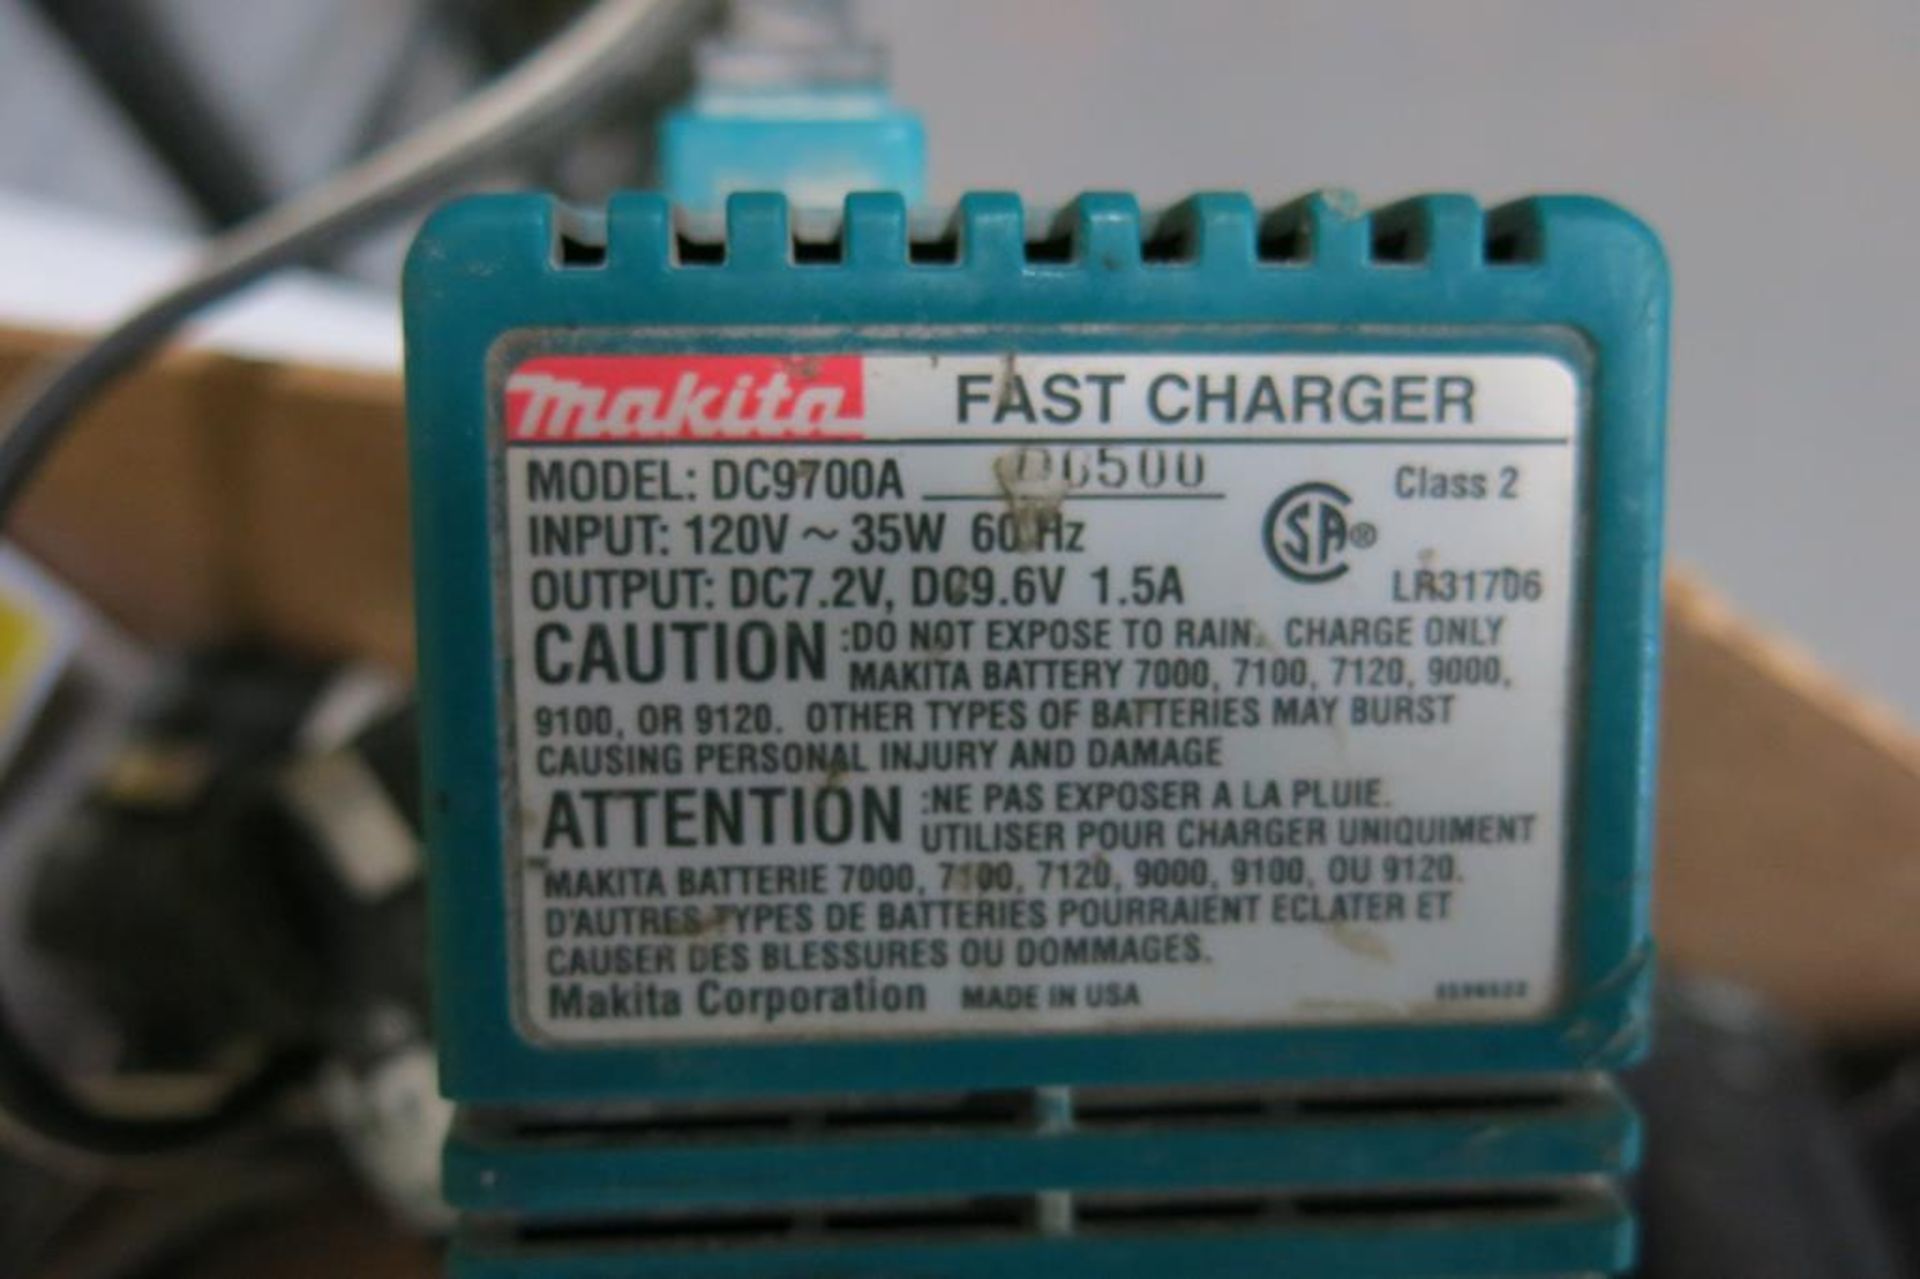 MAKITA, LR31706, CHARGING STATION WITH 6 BATTERIES, DC, 9.6V, 1.3A - Image 2 of 2